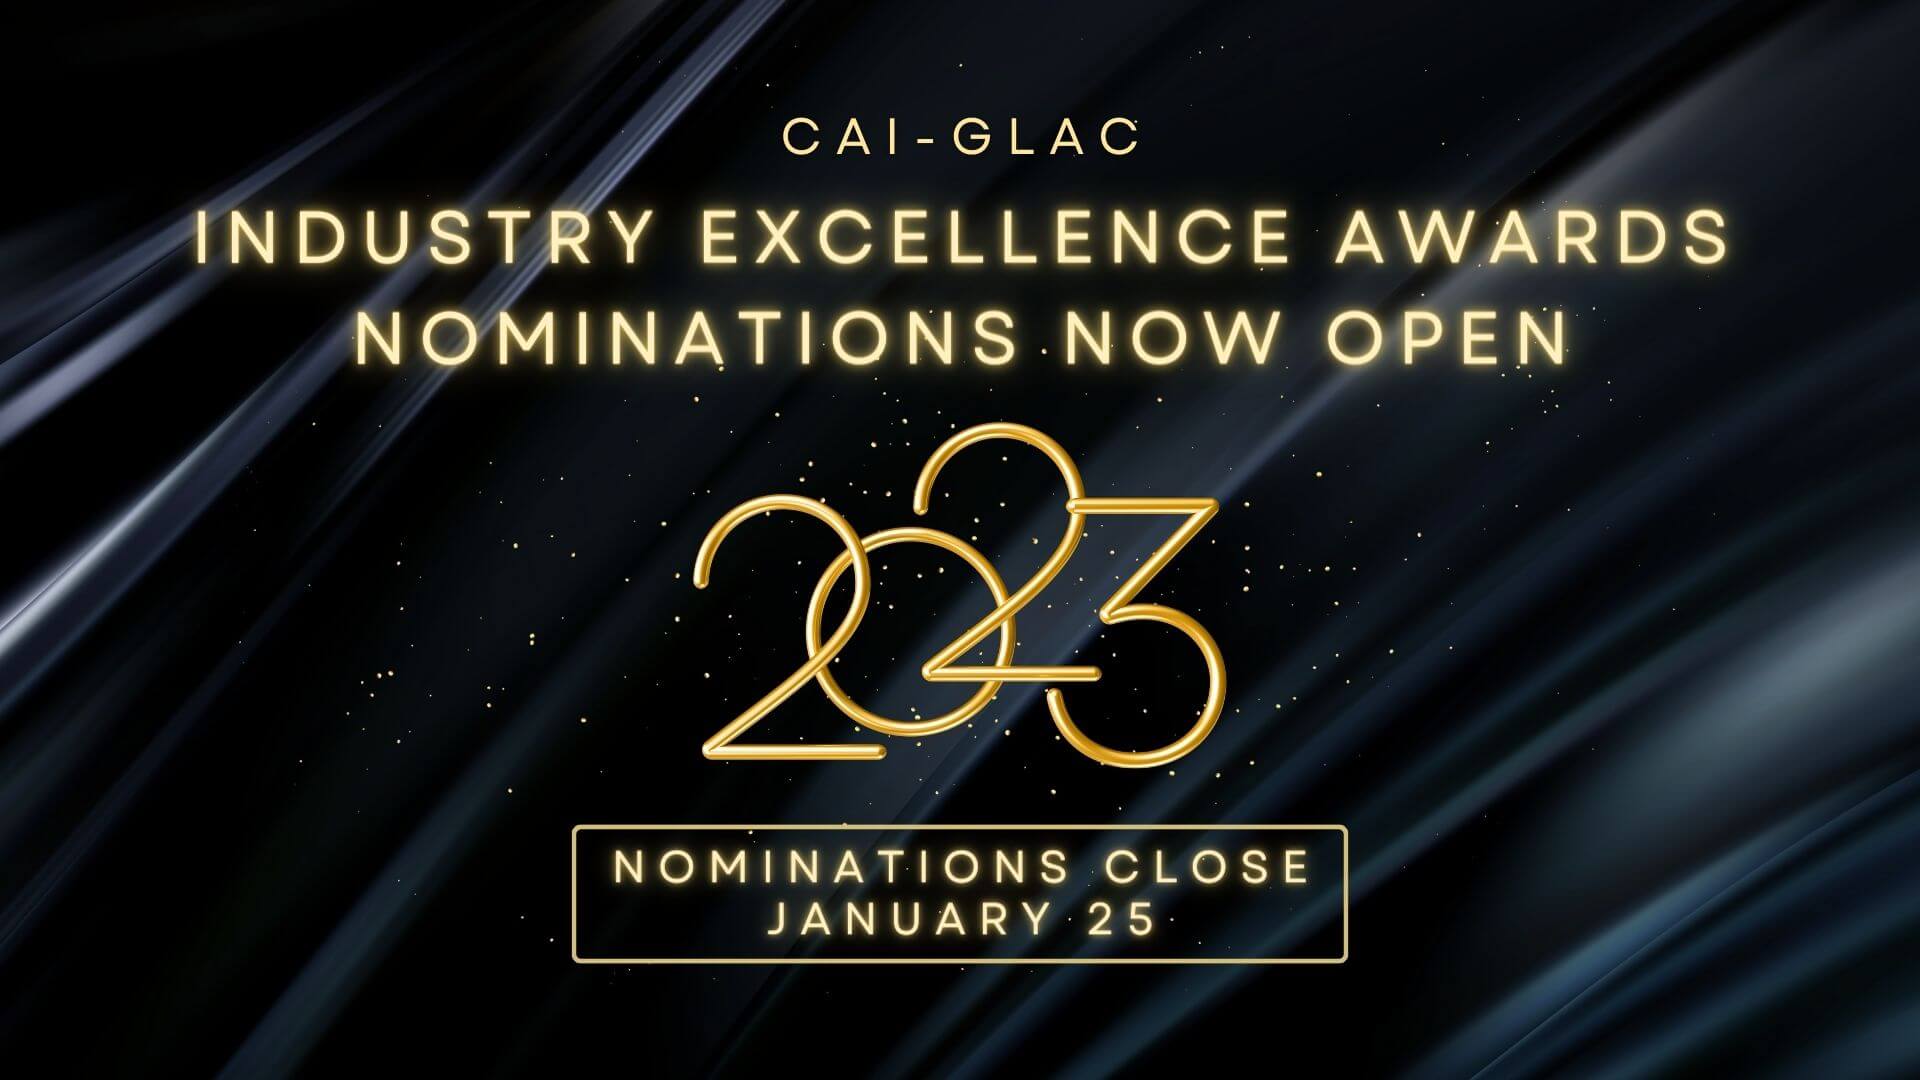 Industry Excellence Awards Nominations Now Open - close January 25